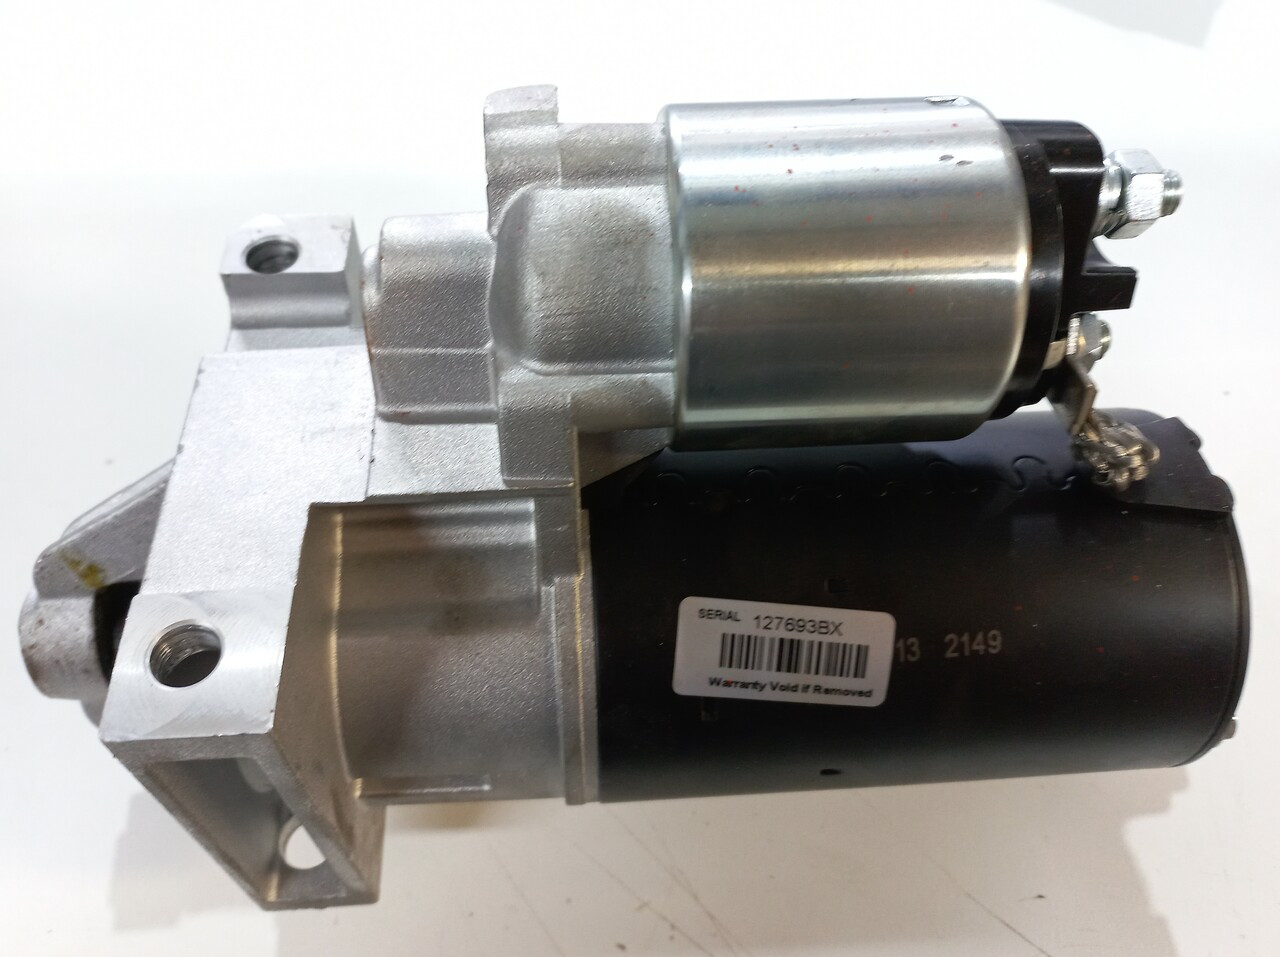 Starter Motor Mitsubishi Type 12V 1.6kW 9T CW 25mm Suits Holden Commodore VB-VL 308 5.0L